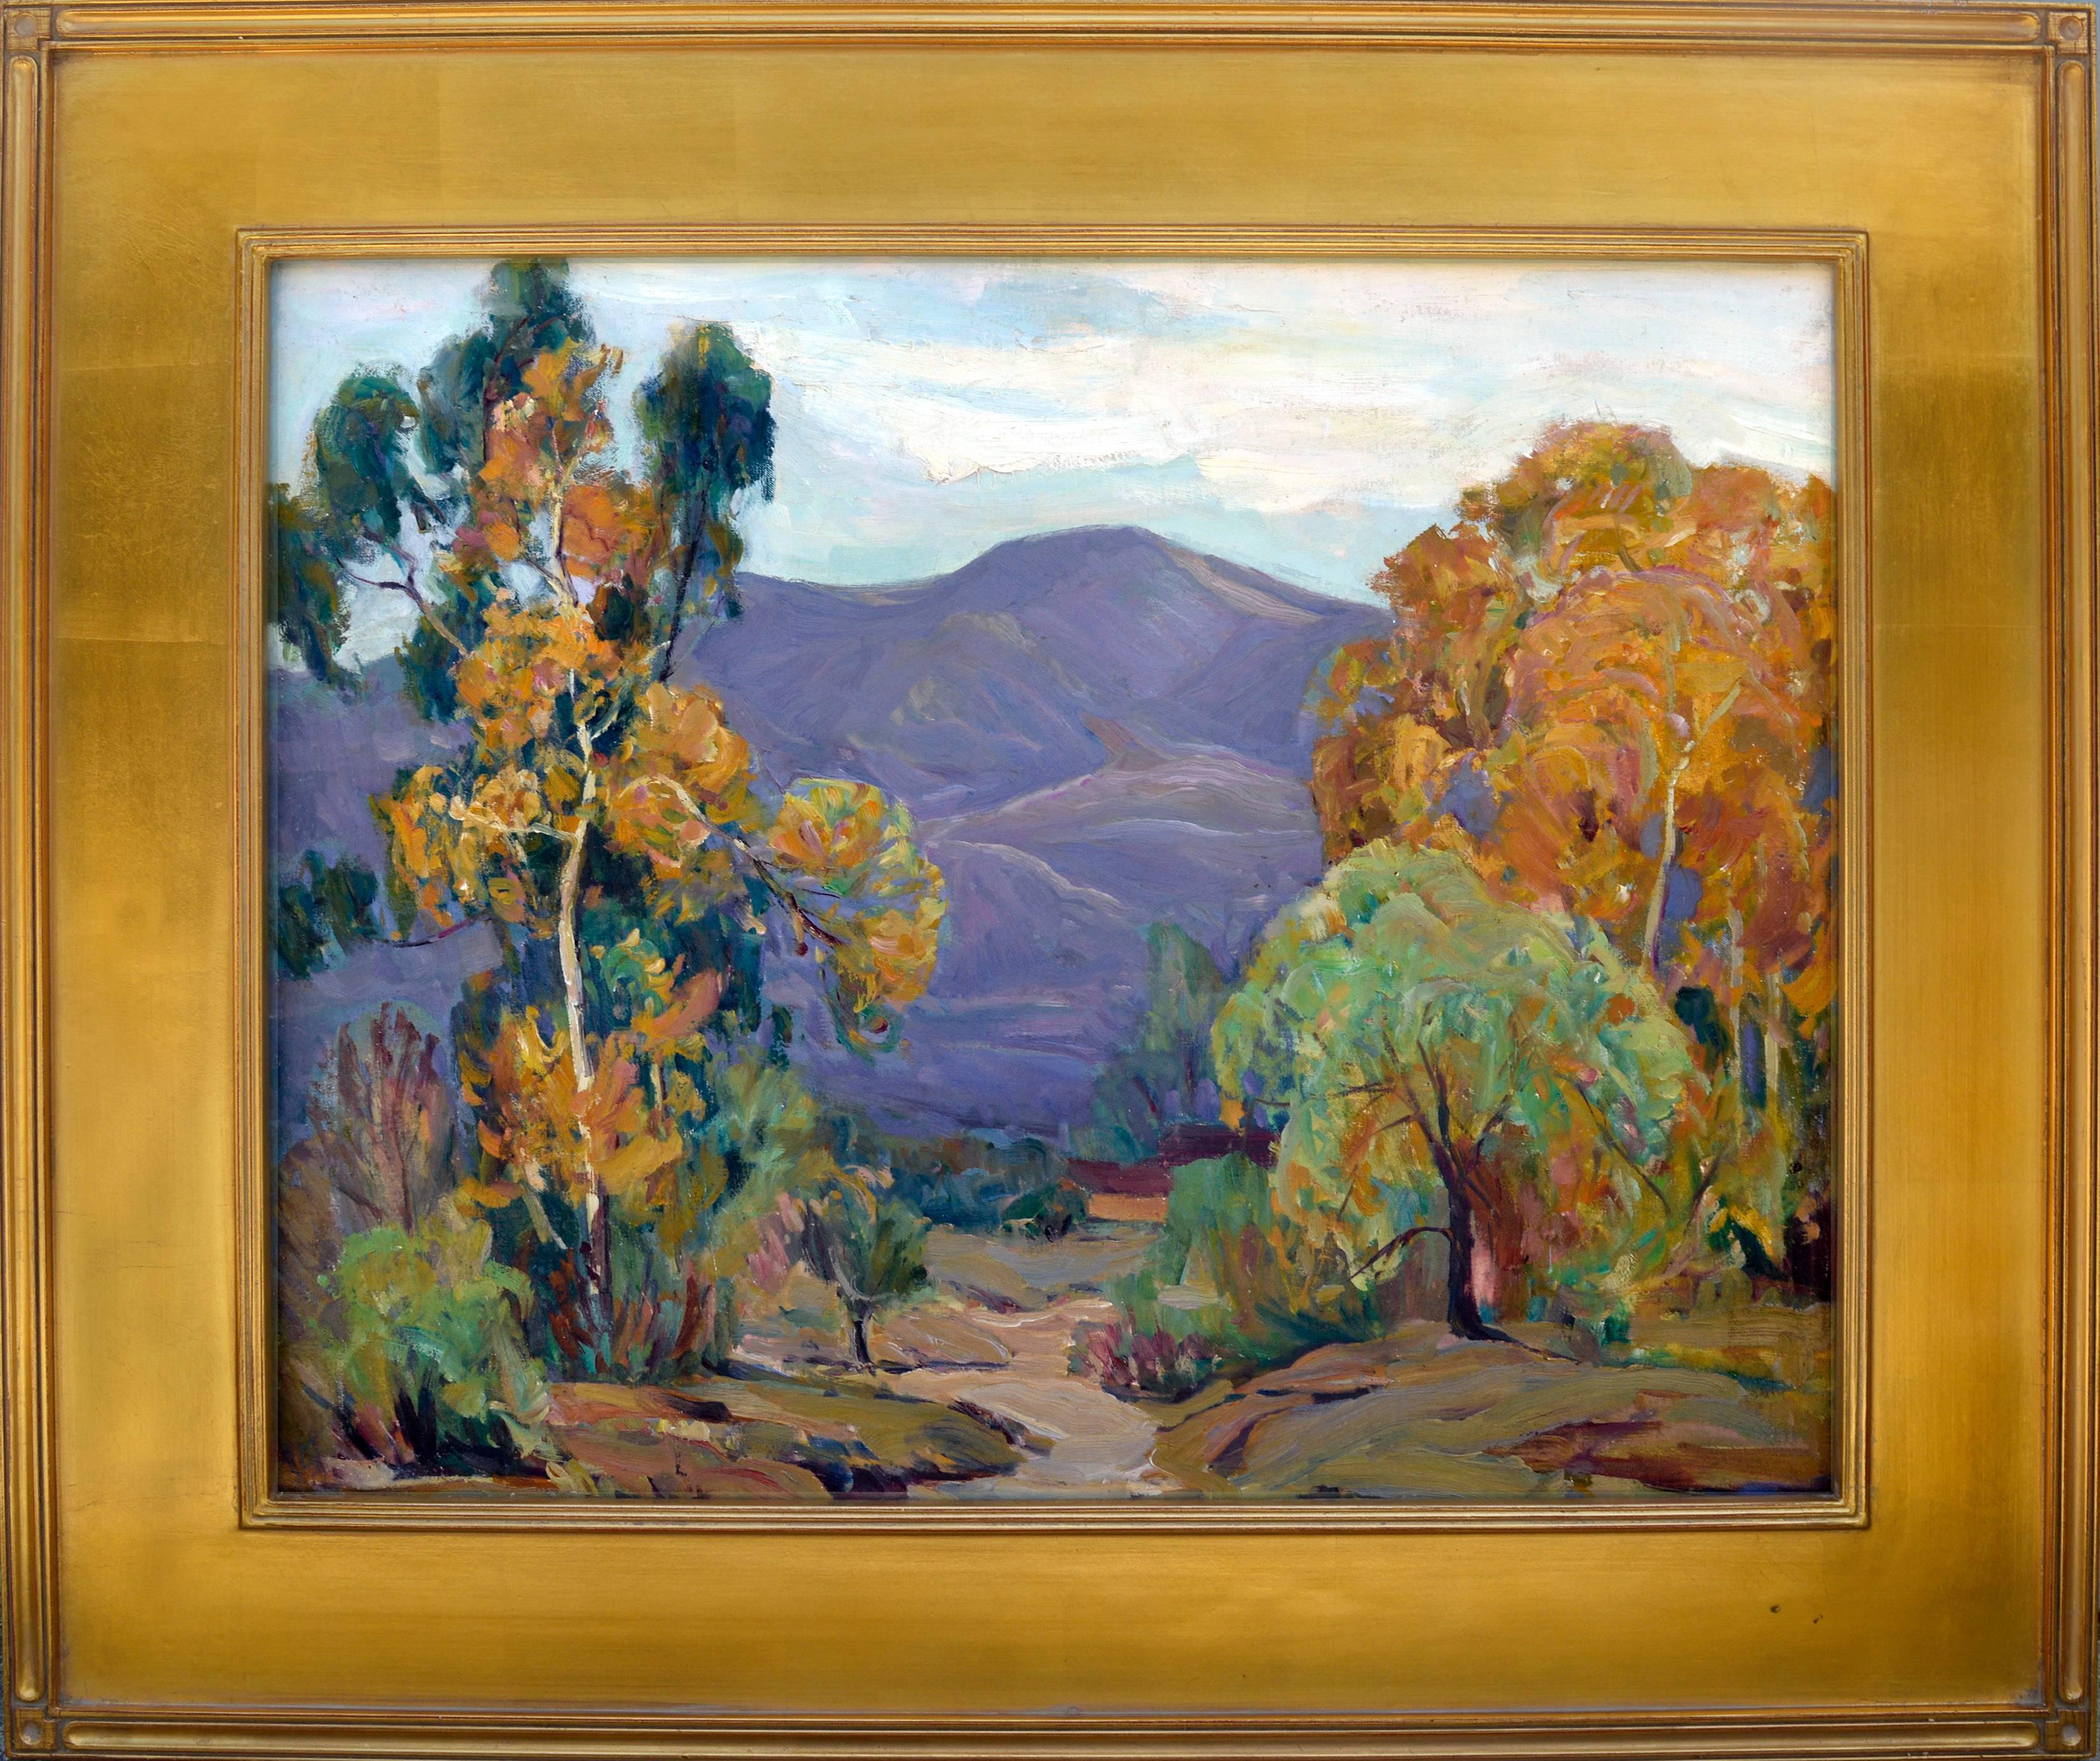 San Gabriel Valley 1939 - Painting by Marie Boening Kendall